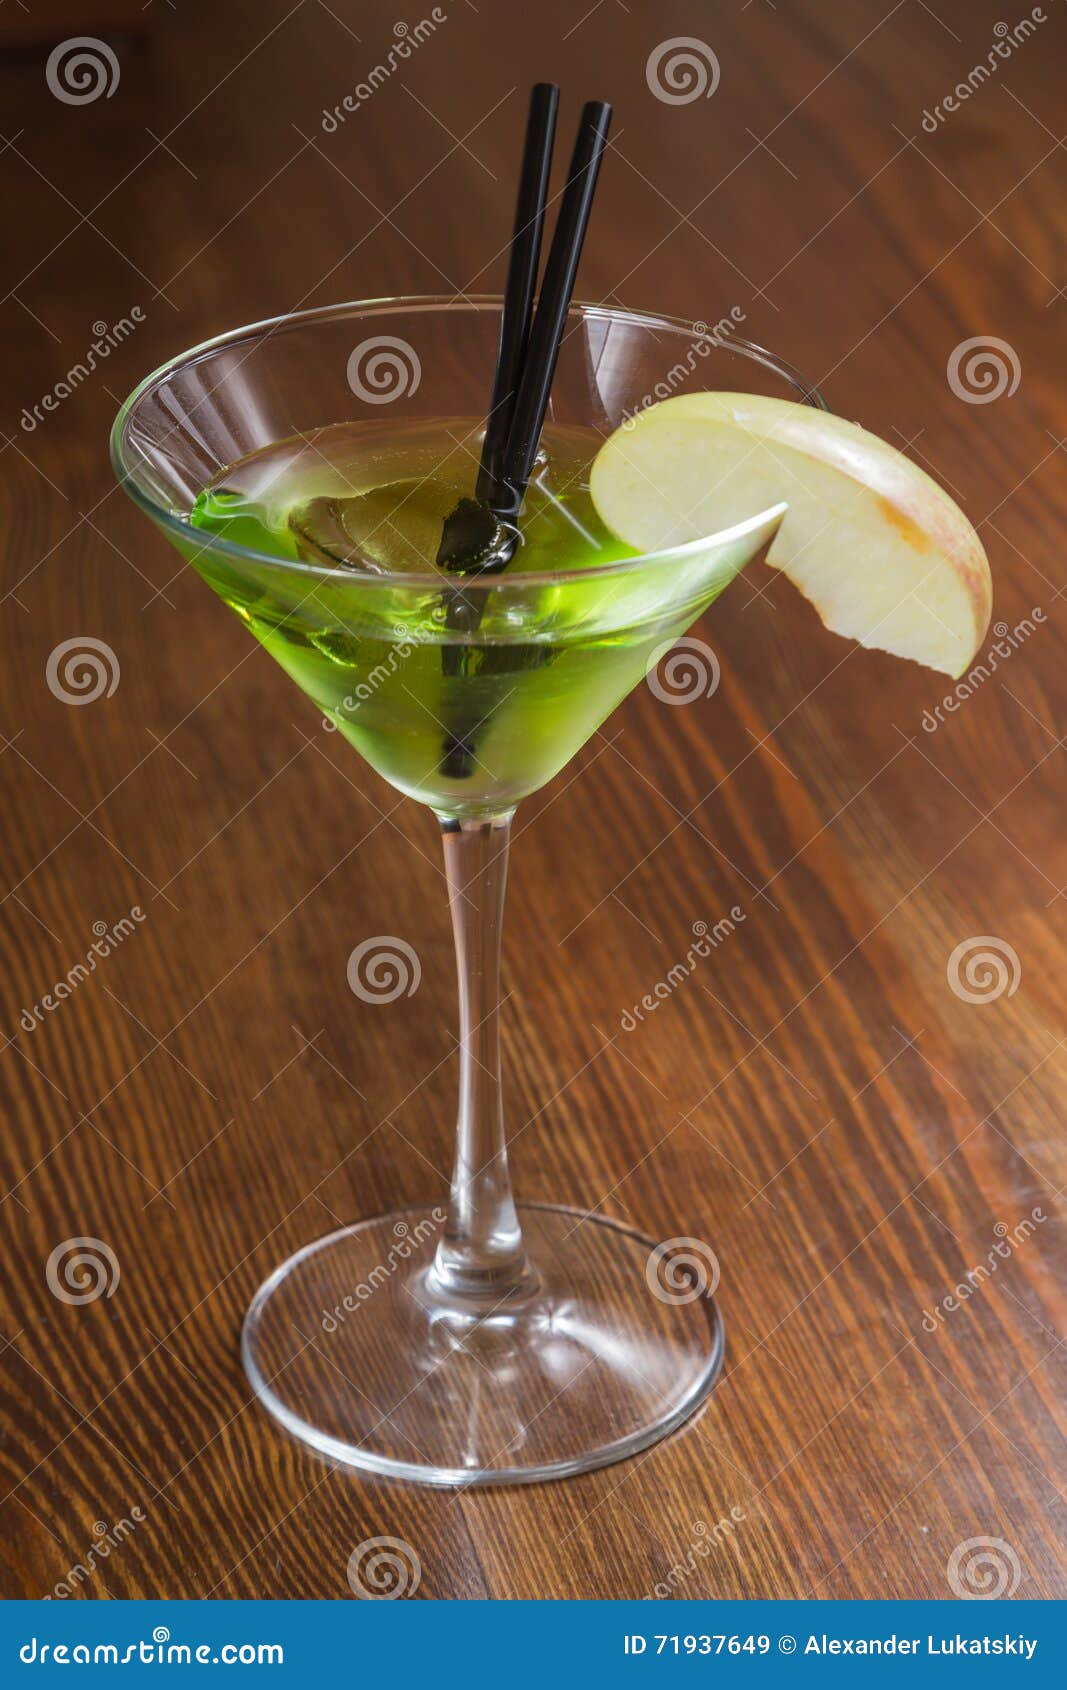 A Delicious Alcoholic Cocktail Stock Image - Image of celebration, cool